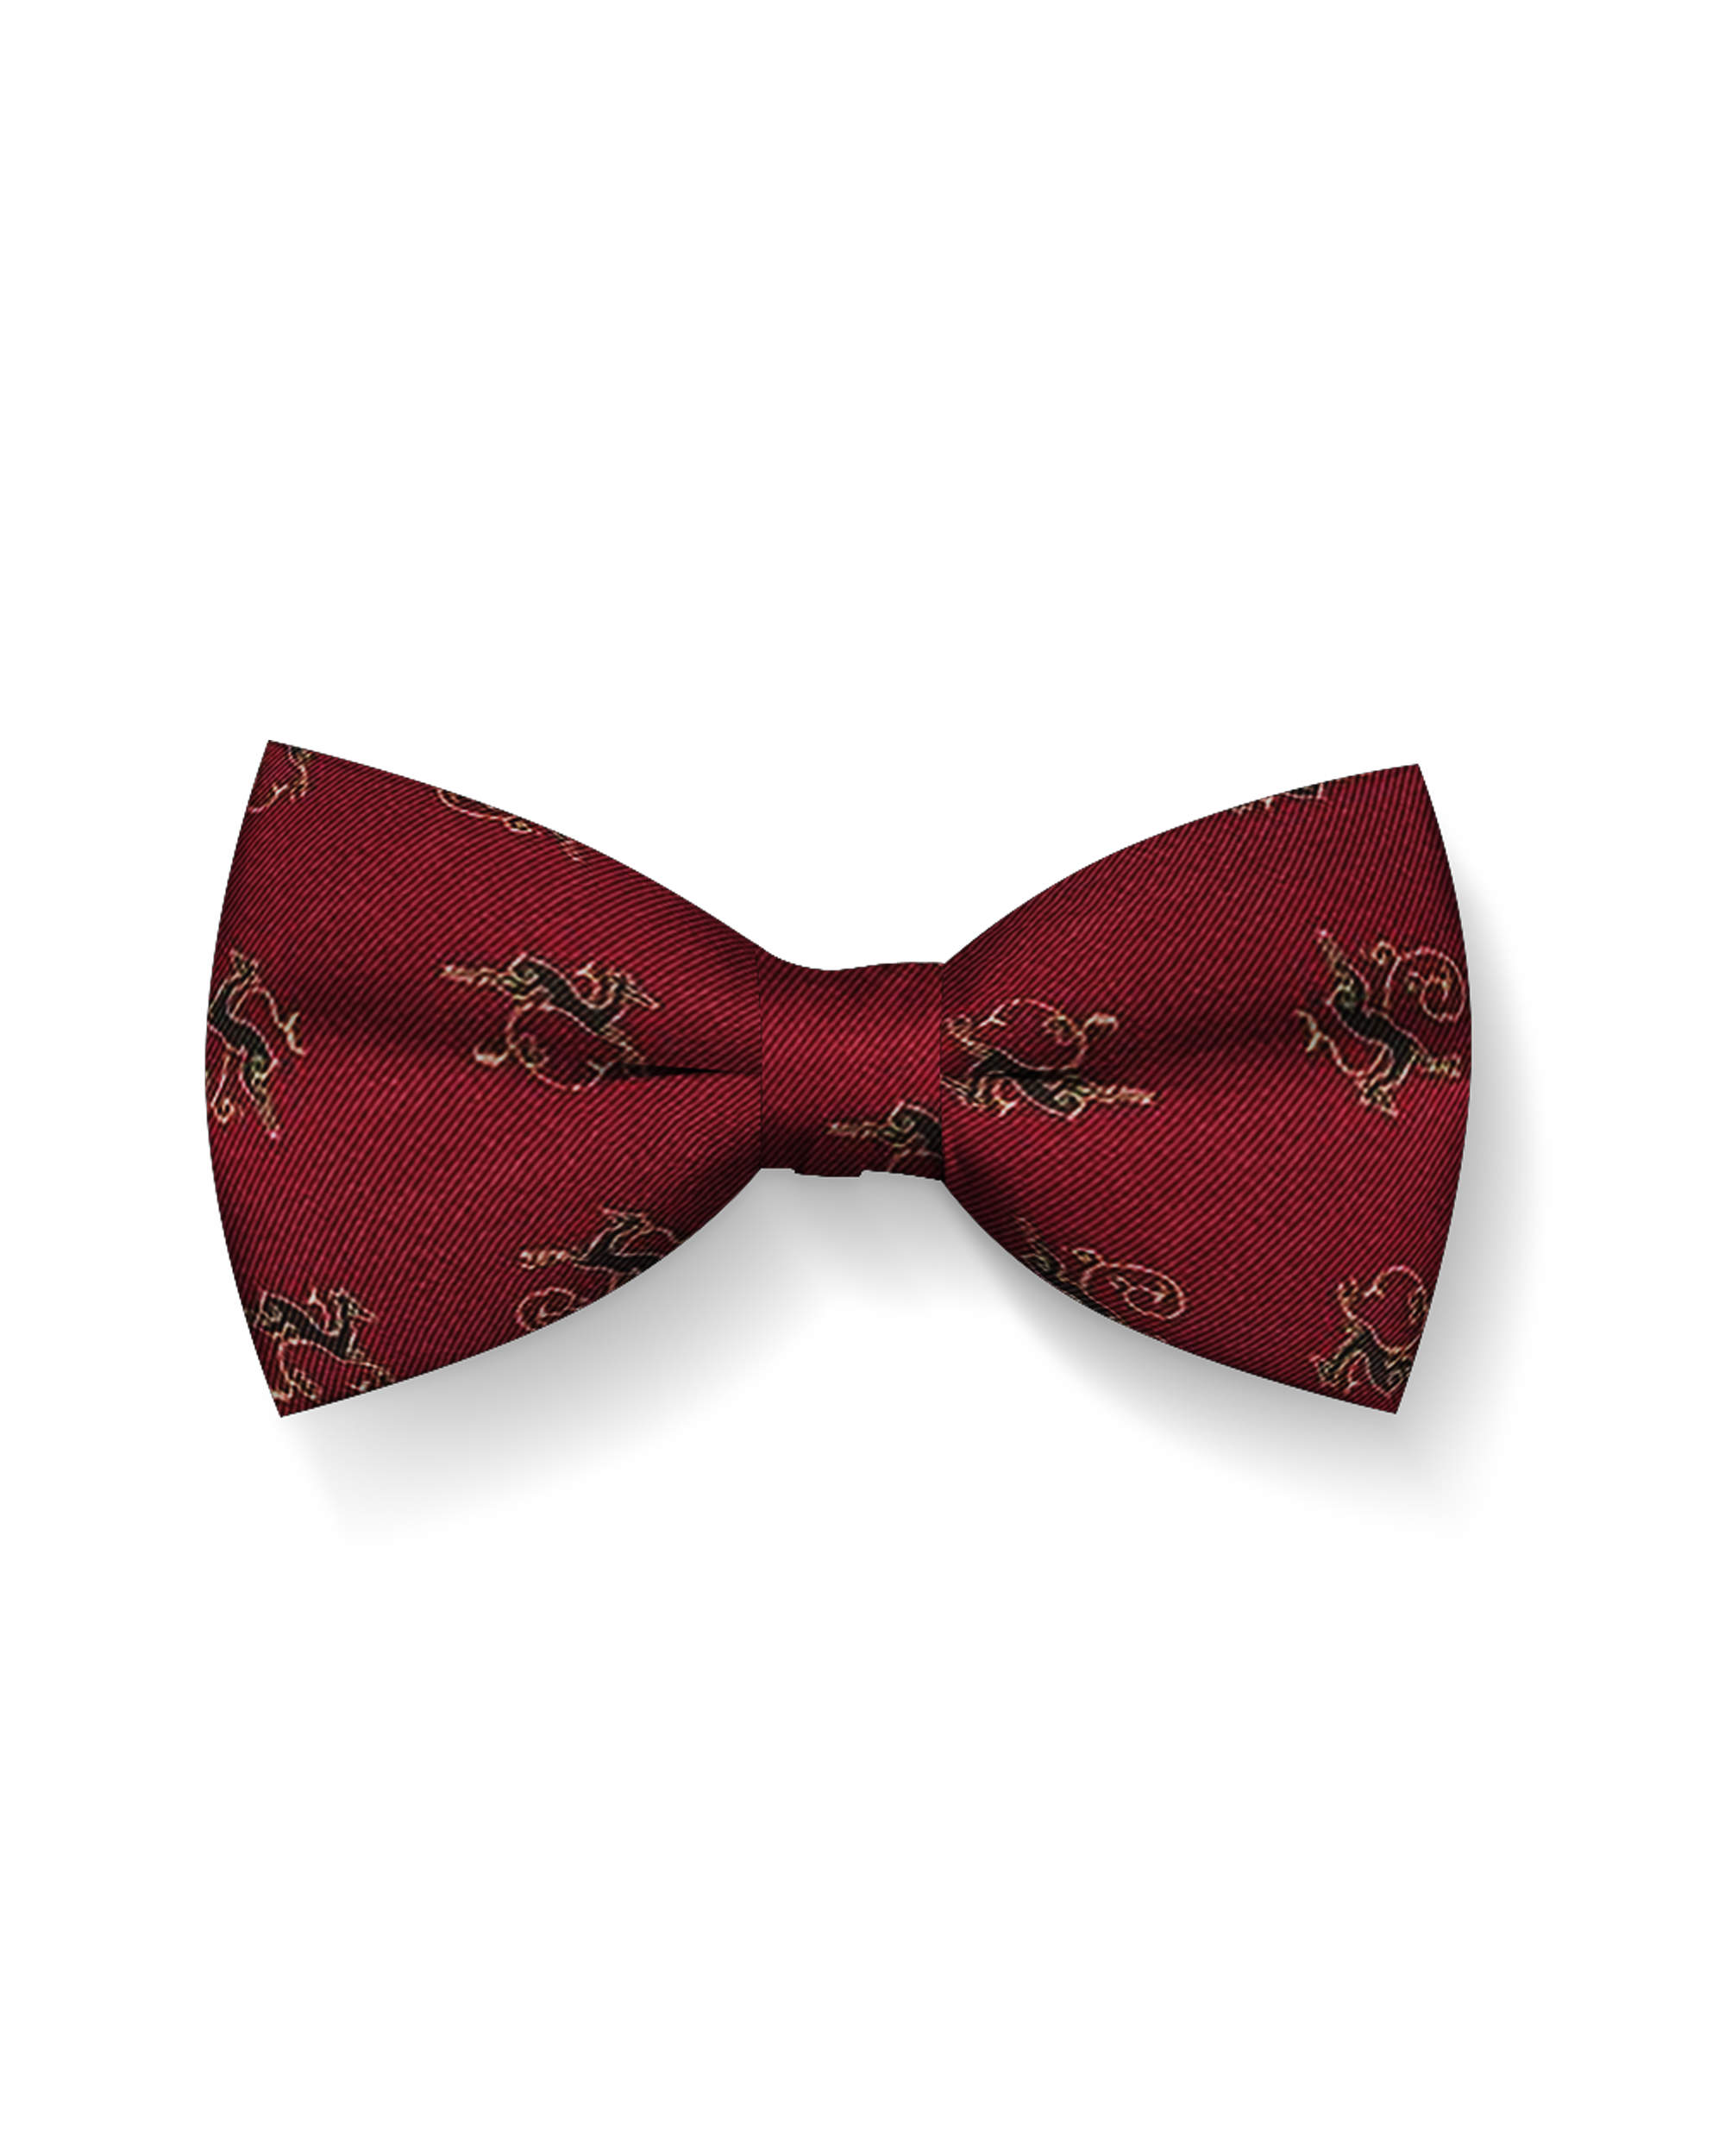 Irmis Nakhtomi (The Deer's Leap) Silk Bow Tie (Red)